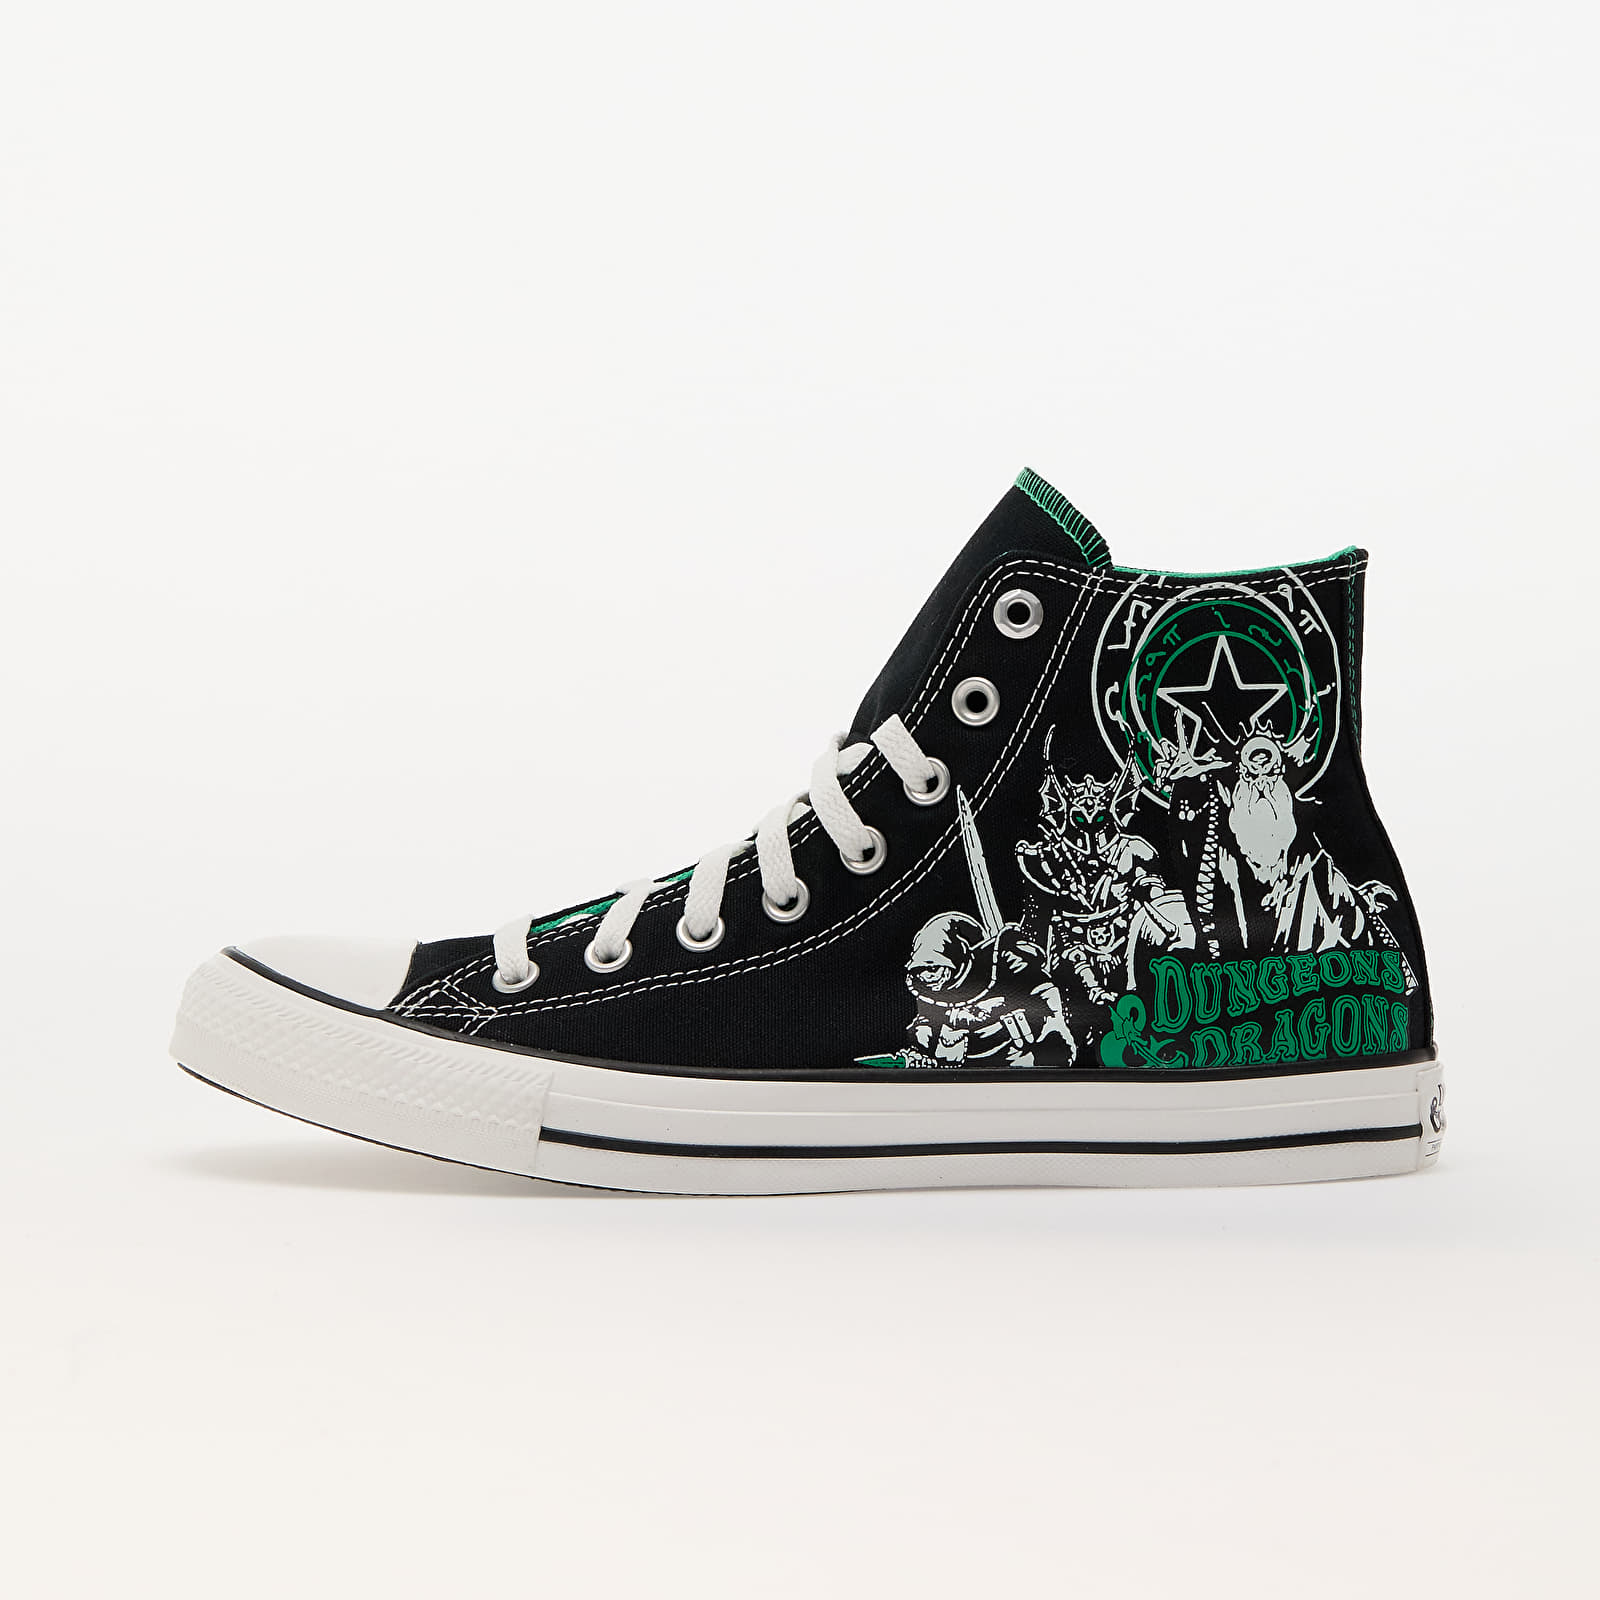 Zapatillas Hombre Converse x Dungeons & Dragons Chuck Taylor All Star Black/ Green/ White